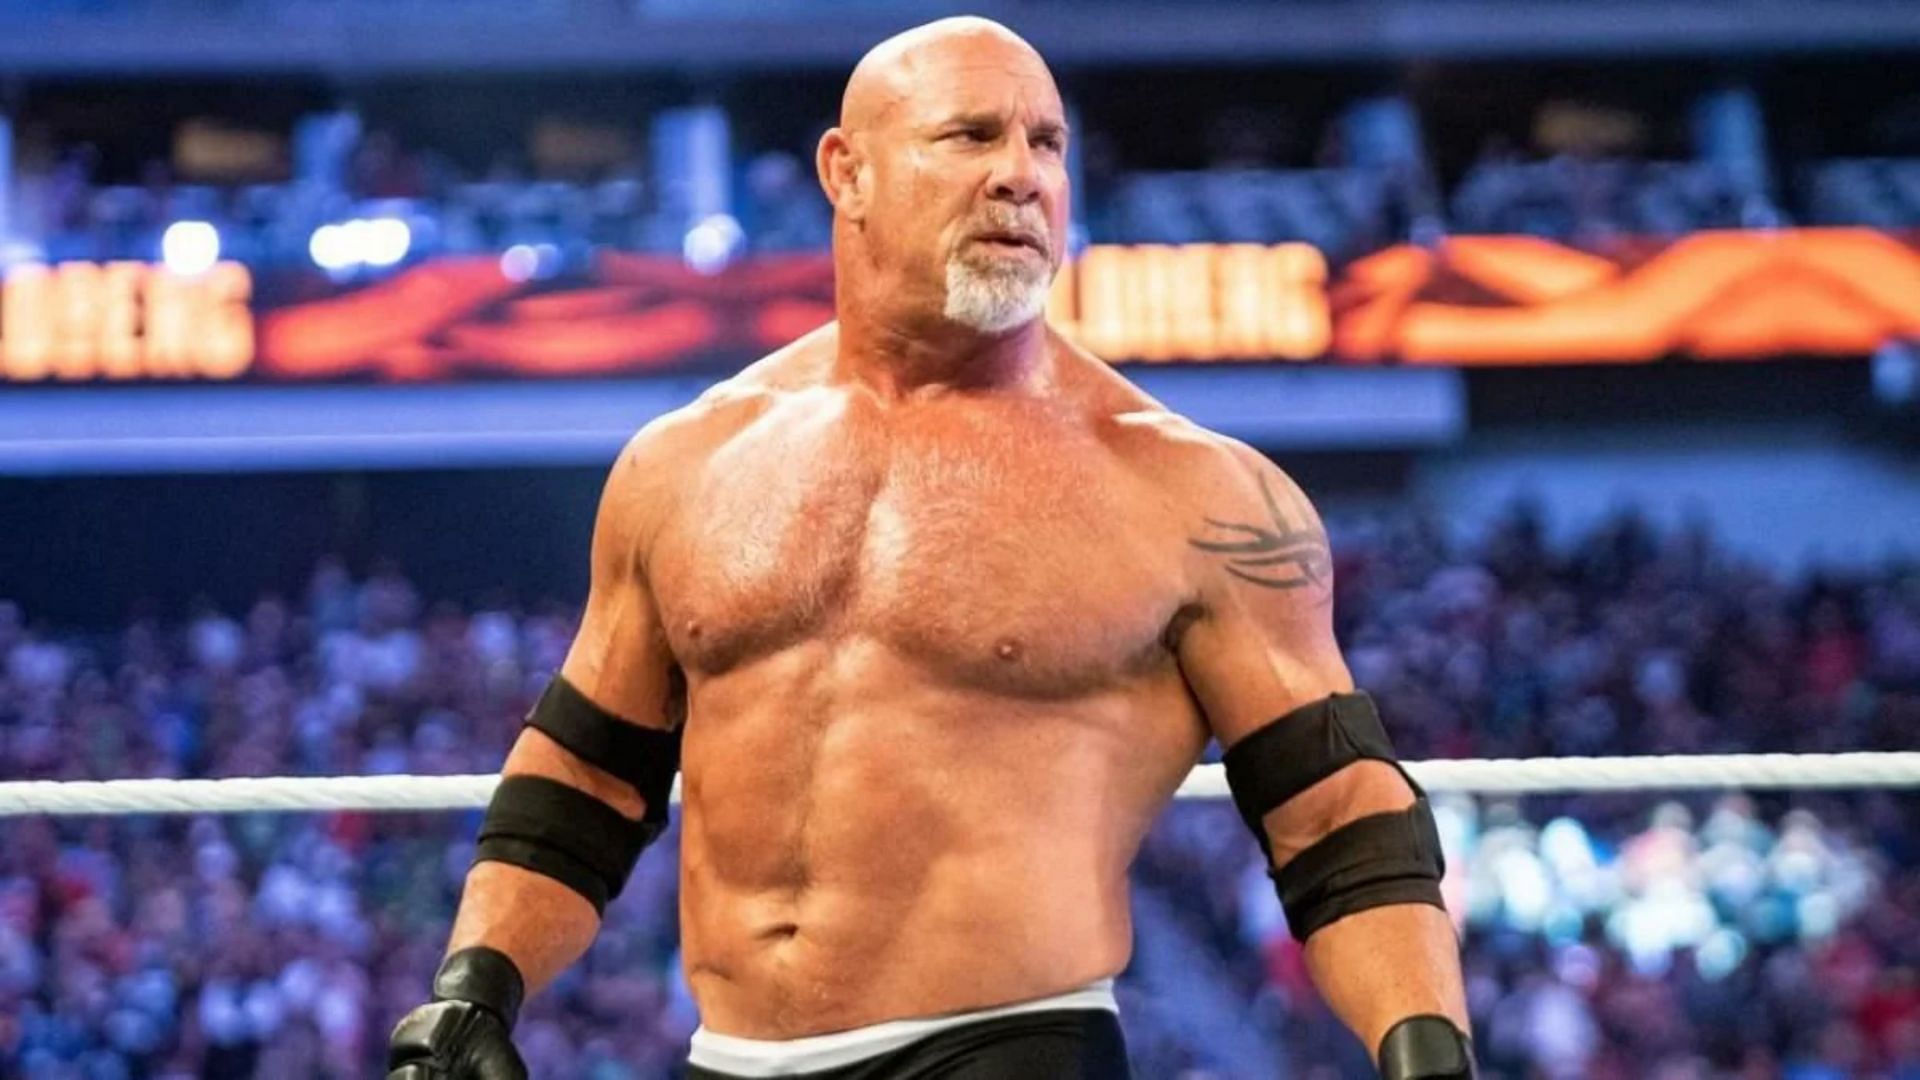 Goldberg first joined WWE in 2003